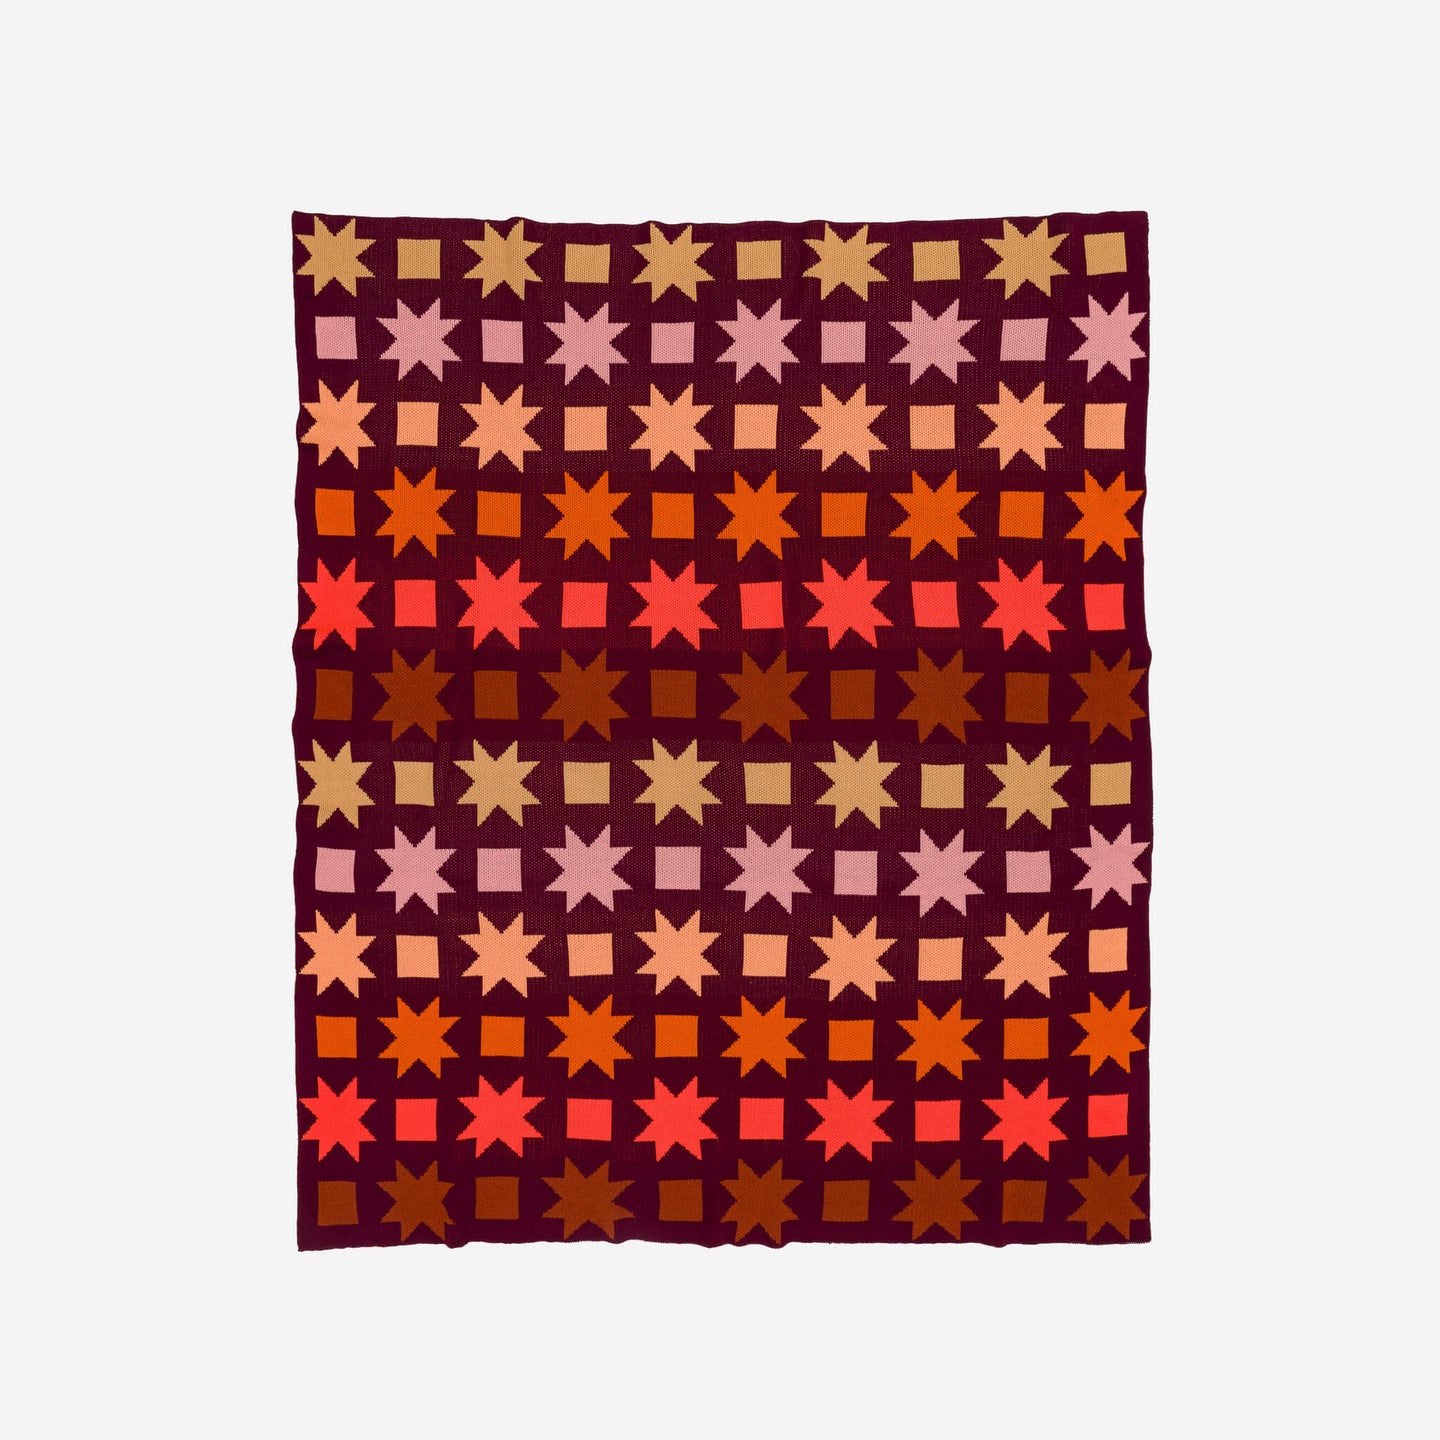 Quilt Star Knit Throw Bold Graphic Pattern Cozy